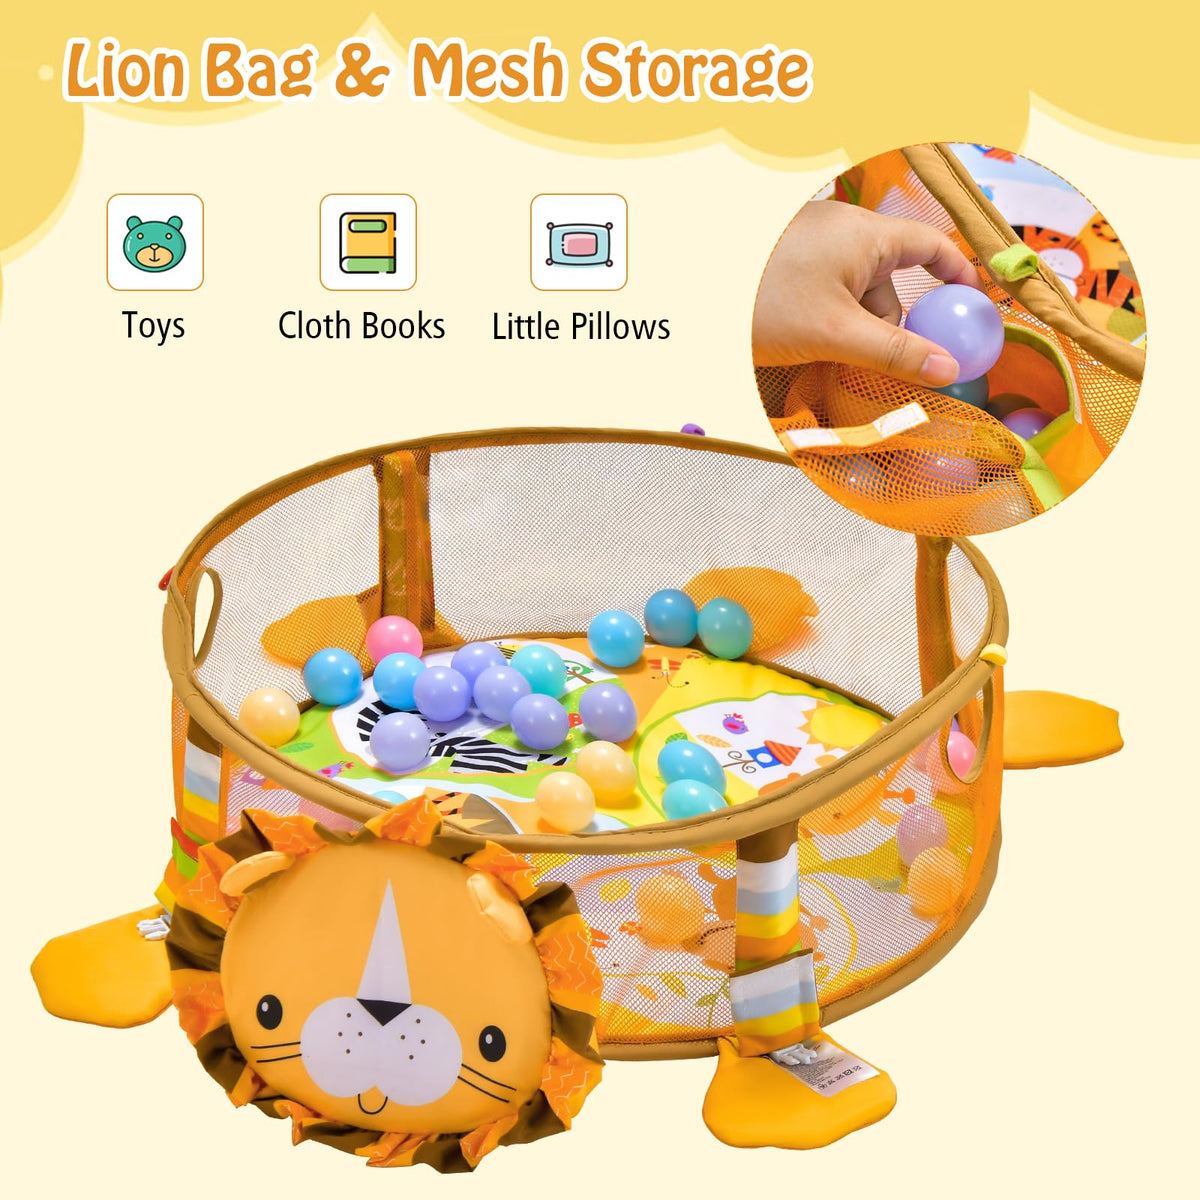 Baby Play Gym, 4-in-1 Baby Play Center for Newborn & Infants w/Soft Padding Mat & Arch Design